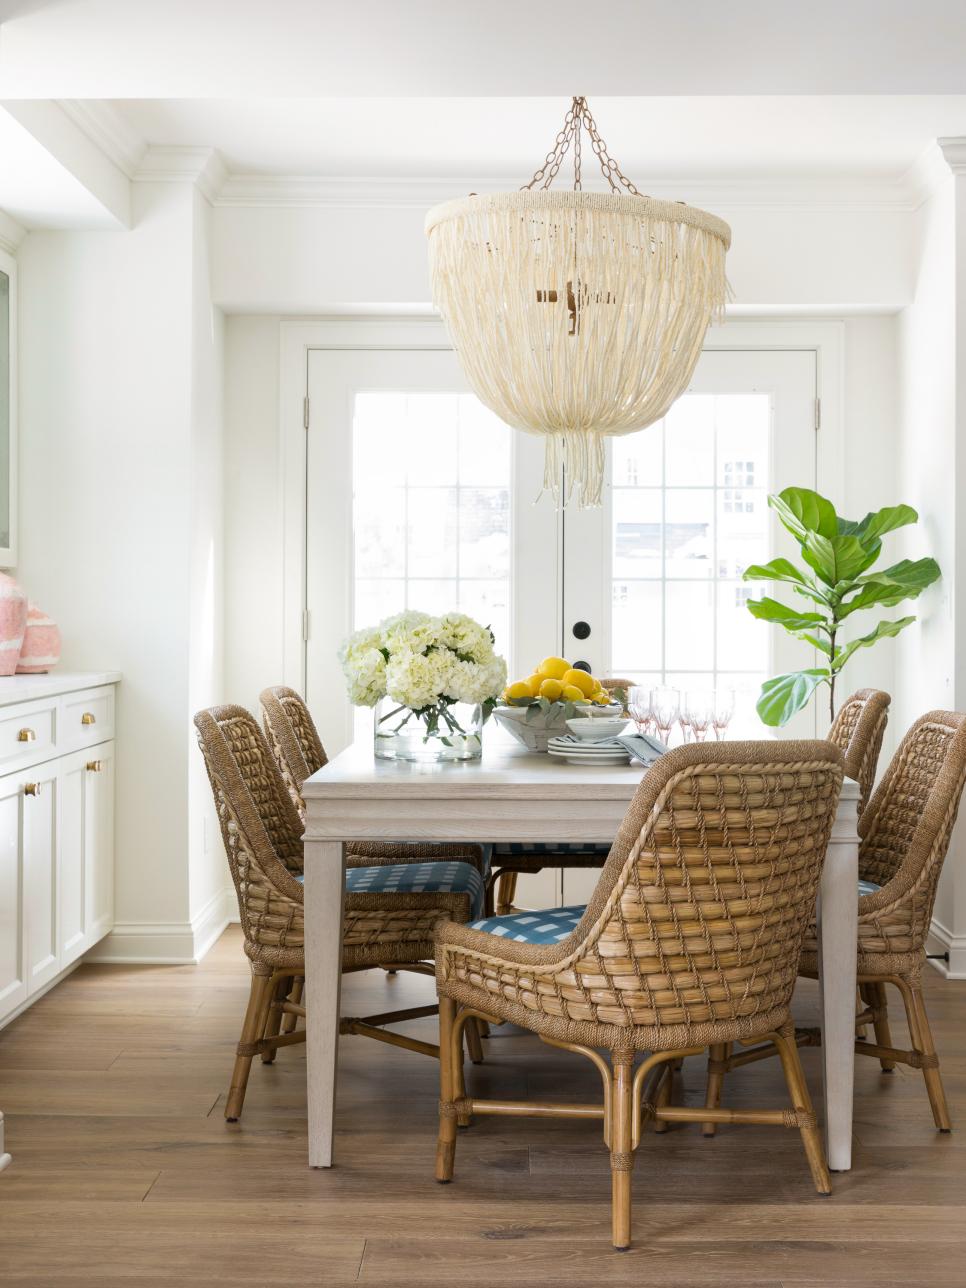 Neutral Dining Room With Boho-Chic Chandelier | HGTV